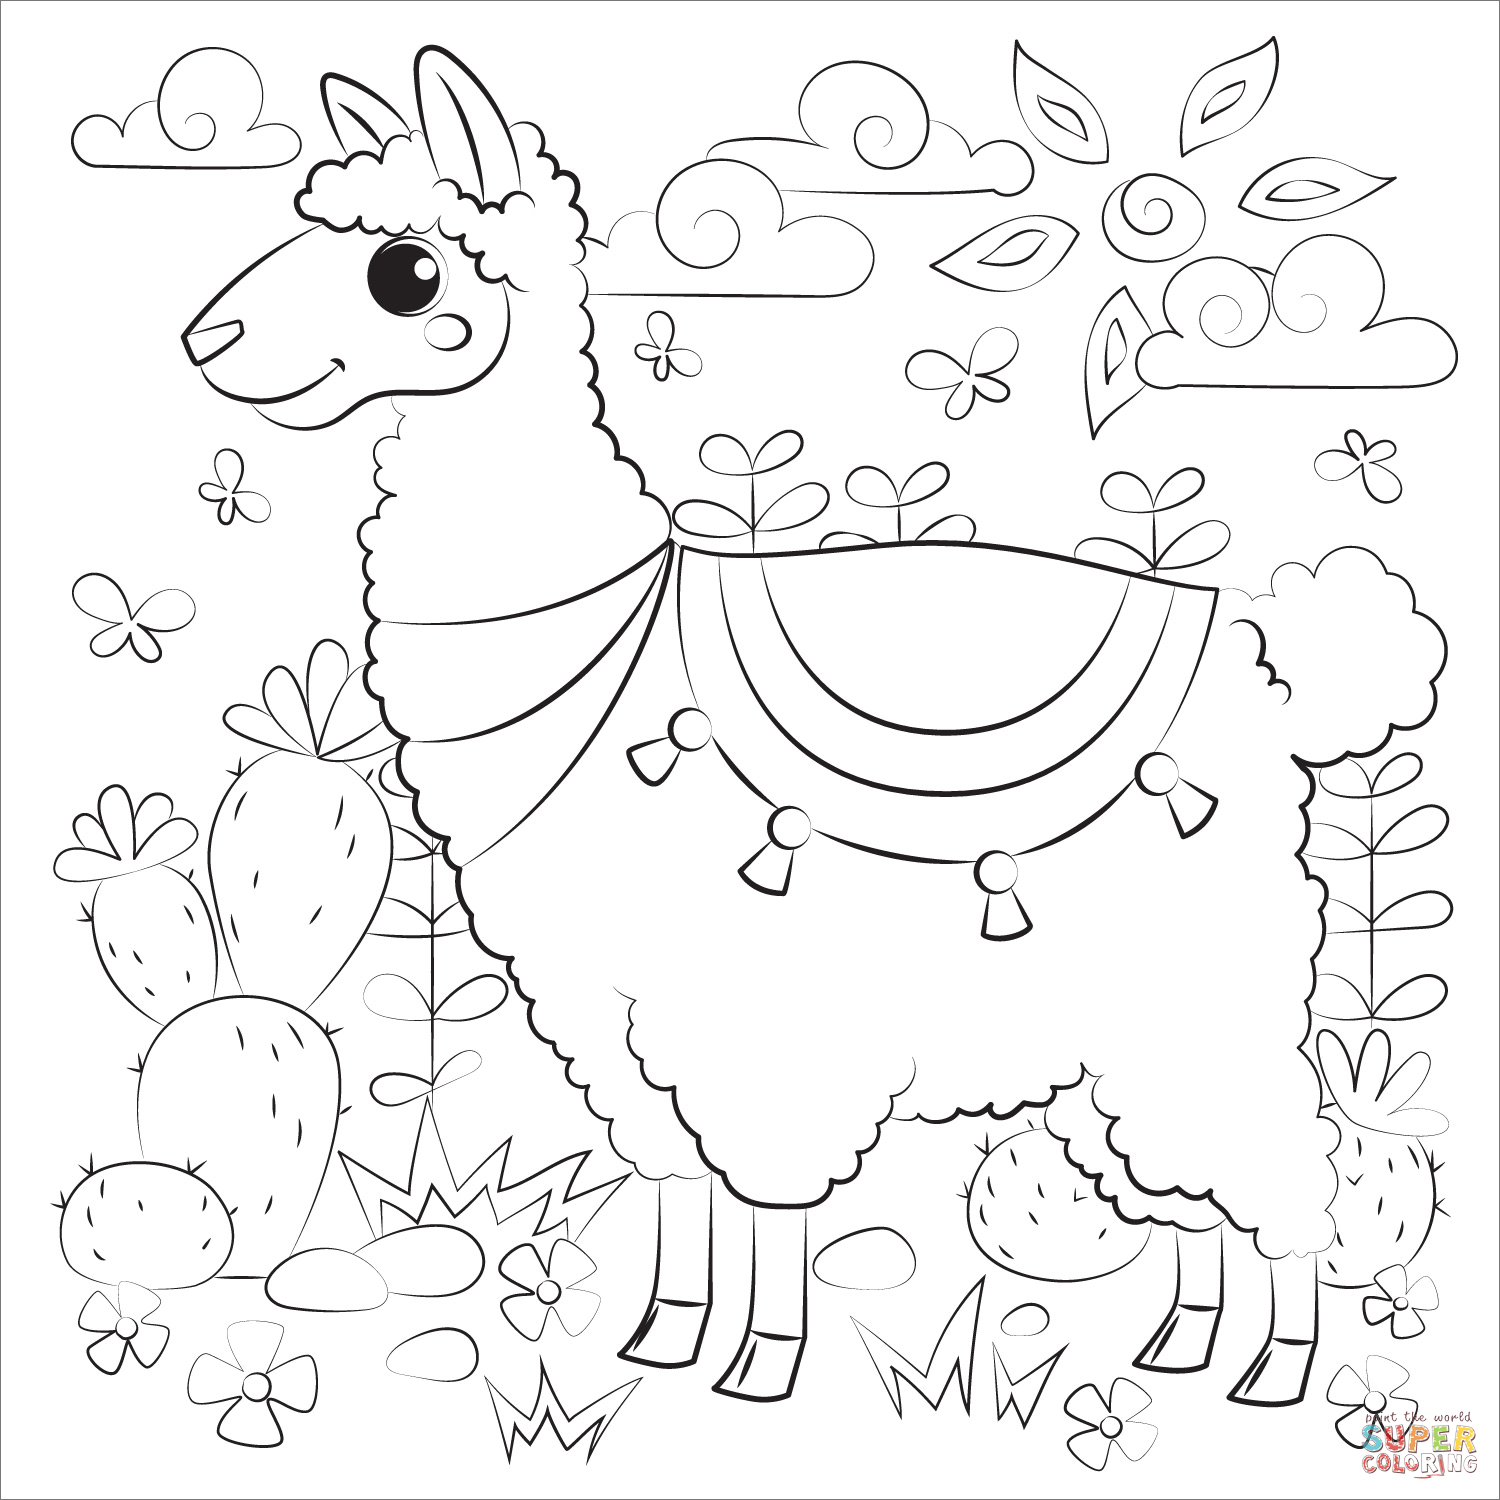 Llama coloring page | Free Printable Coloring Pages